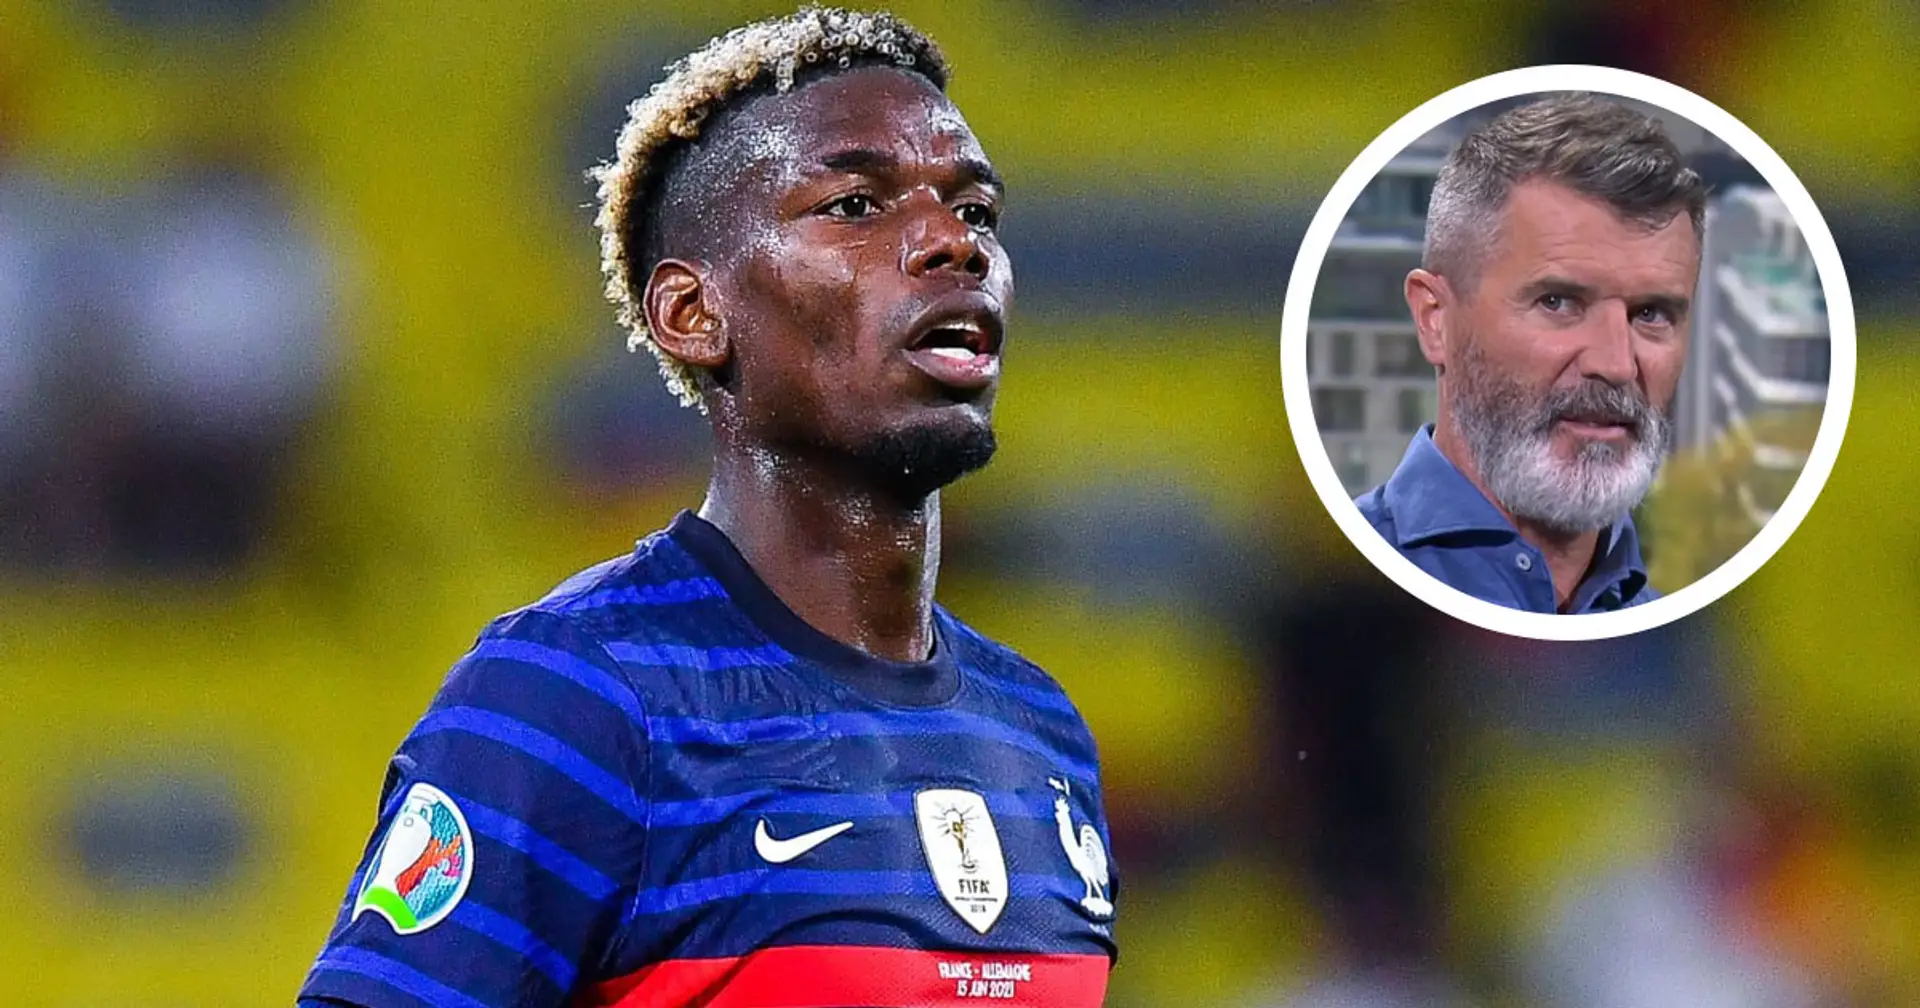 ‘Maybe he doesn’t take responsibility’: Roy Keane raises questions on Pogba’s inability to replicate France heroics for United